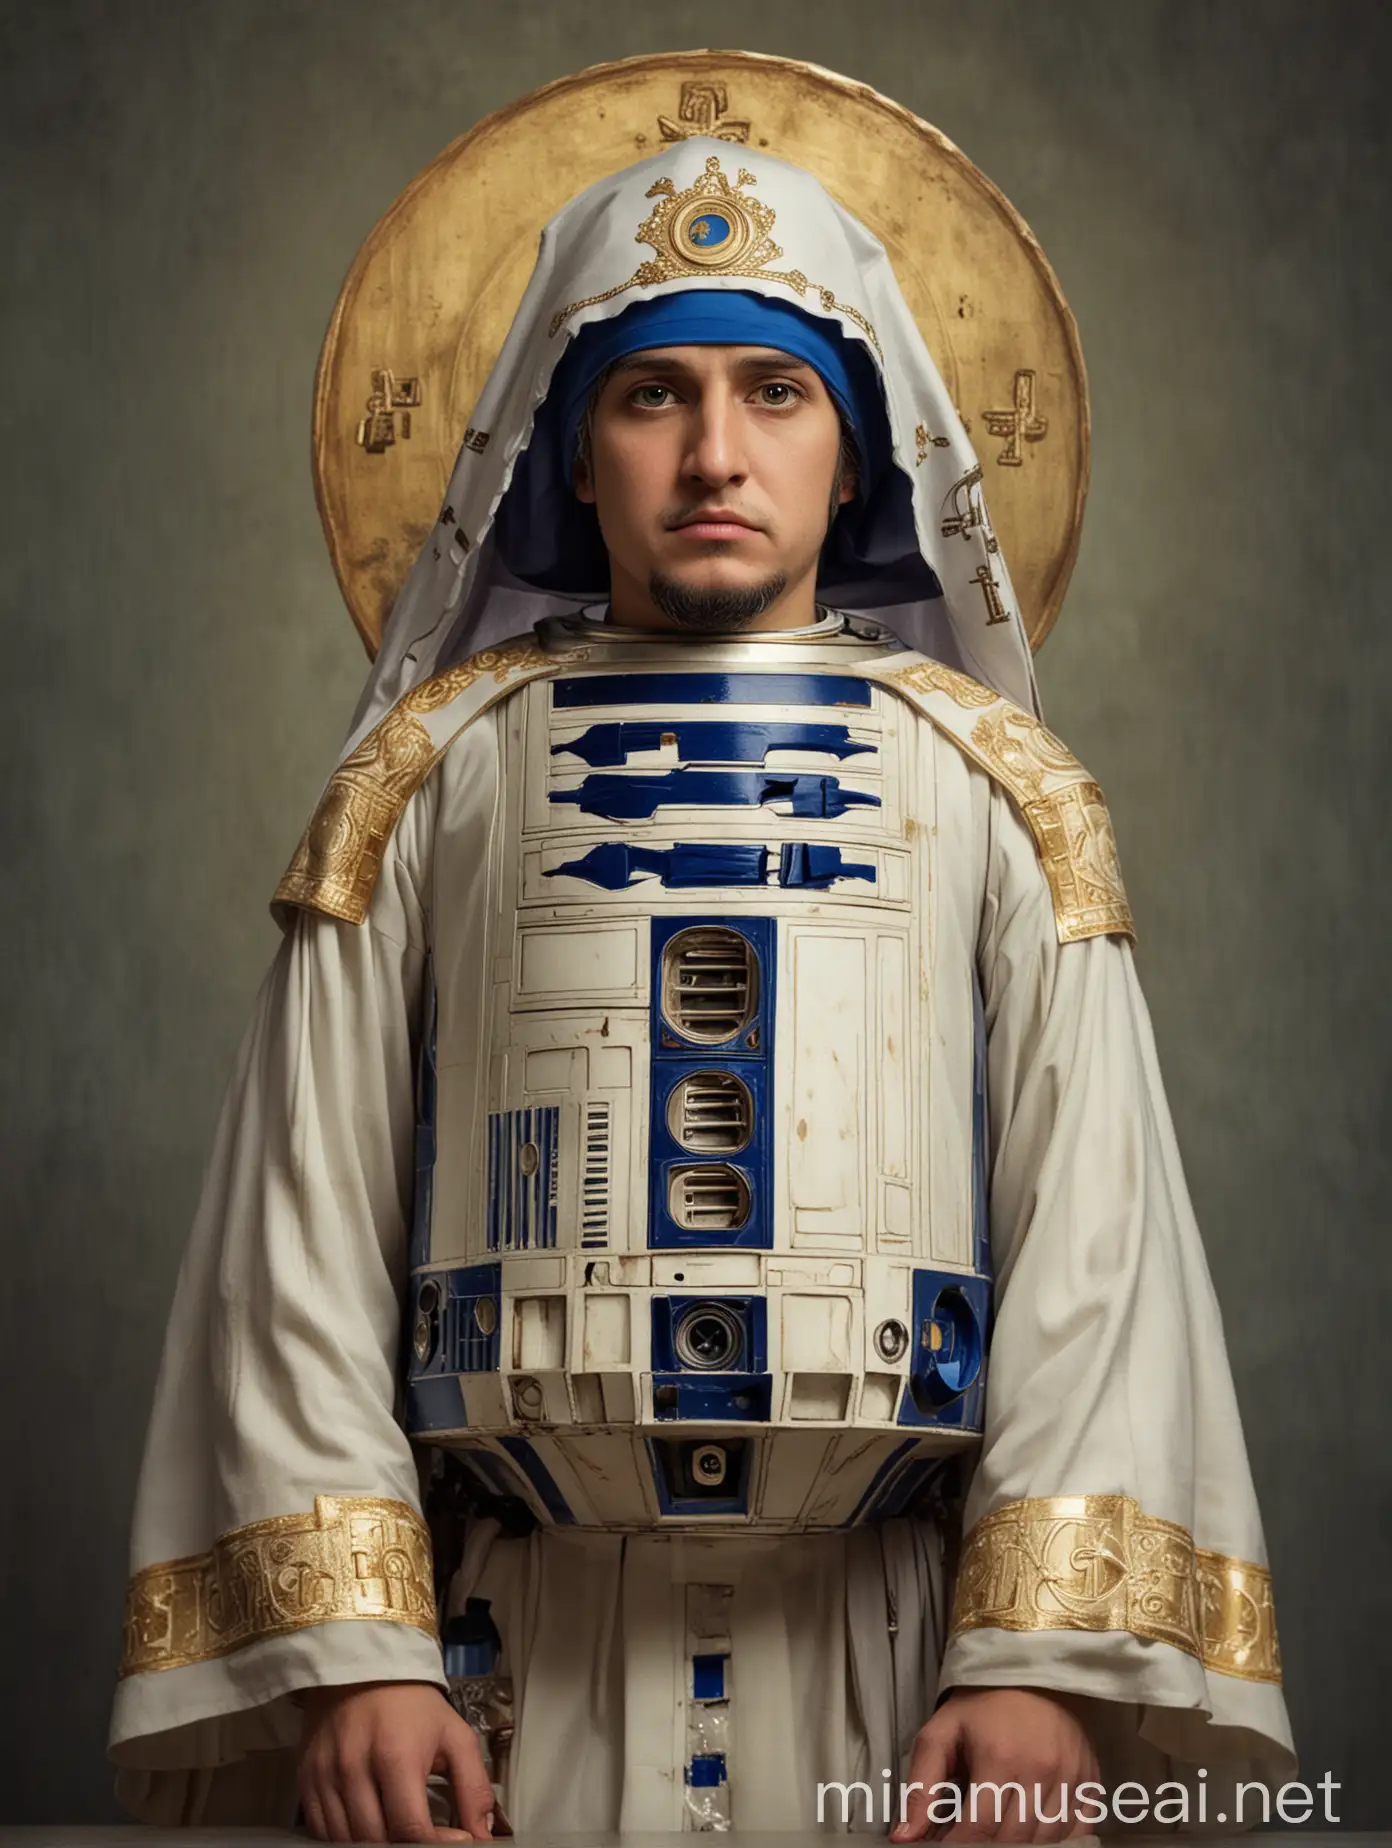 R2D2 Depicted as an Eastern Orthodox Saint in Iconic Style